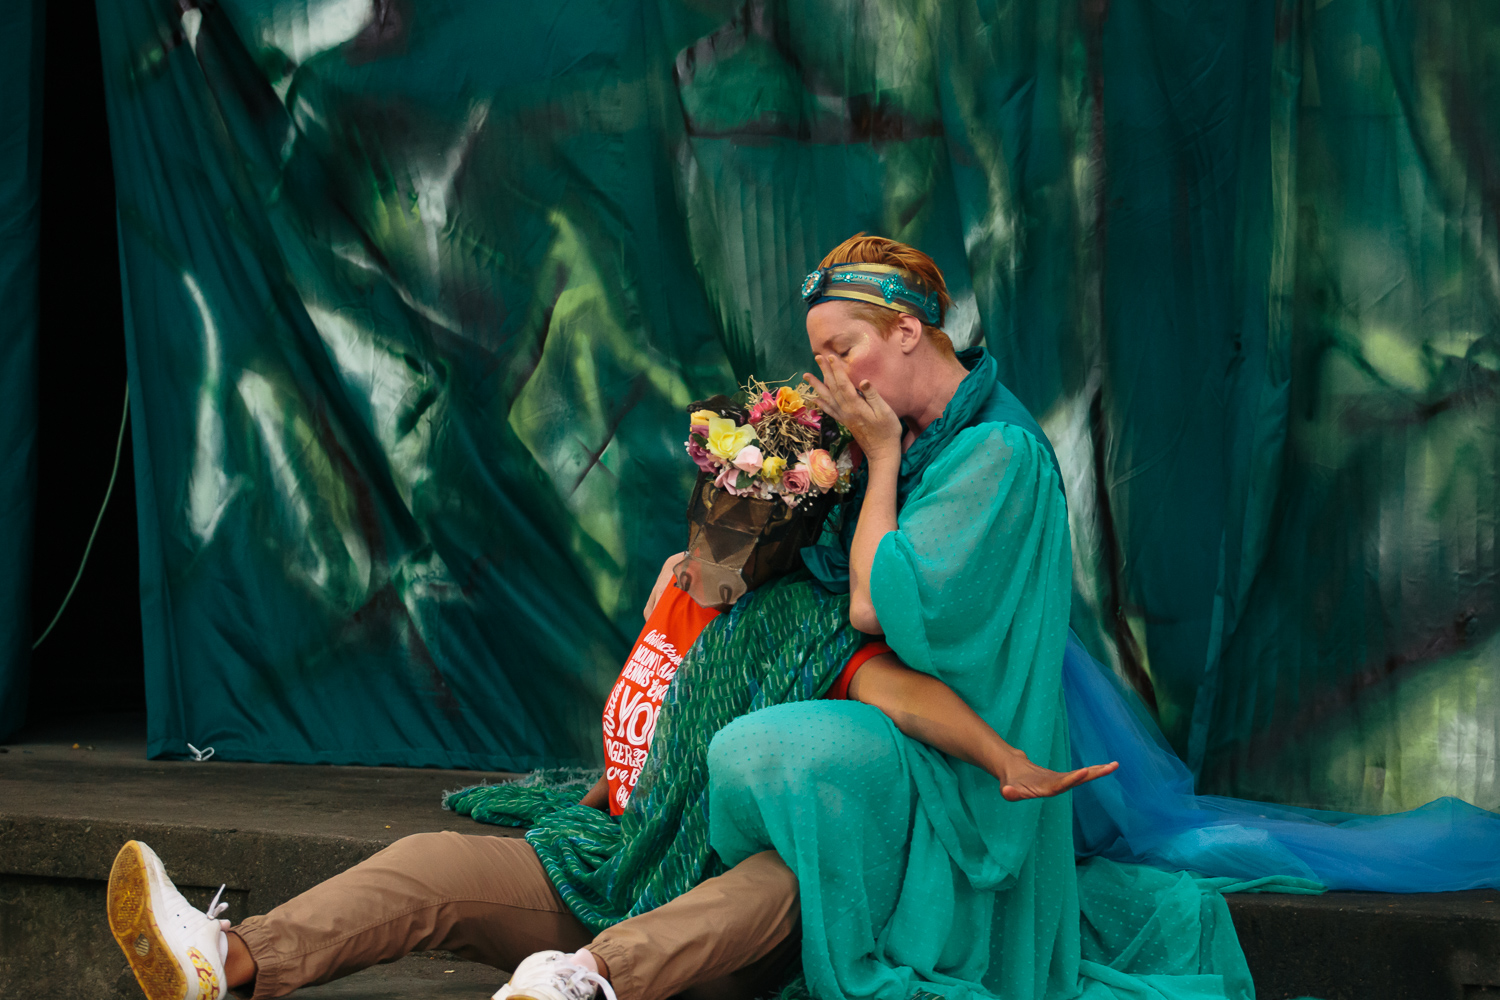 A woman in a green costume sits on a stage with a child who is wearing a crown of flowers.